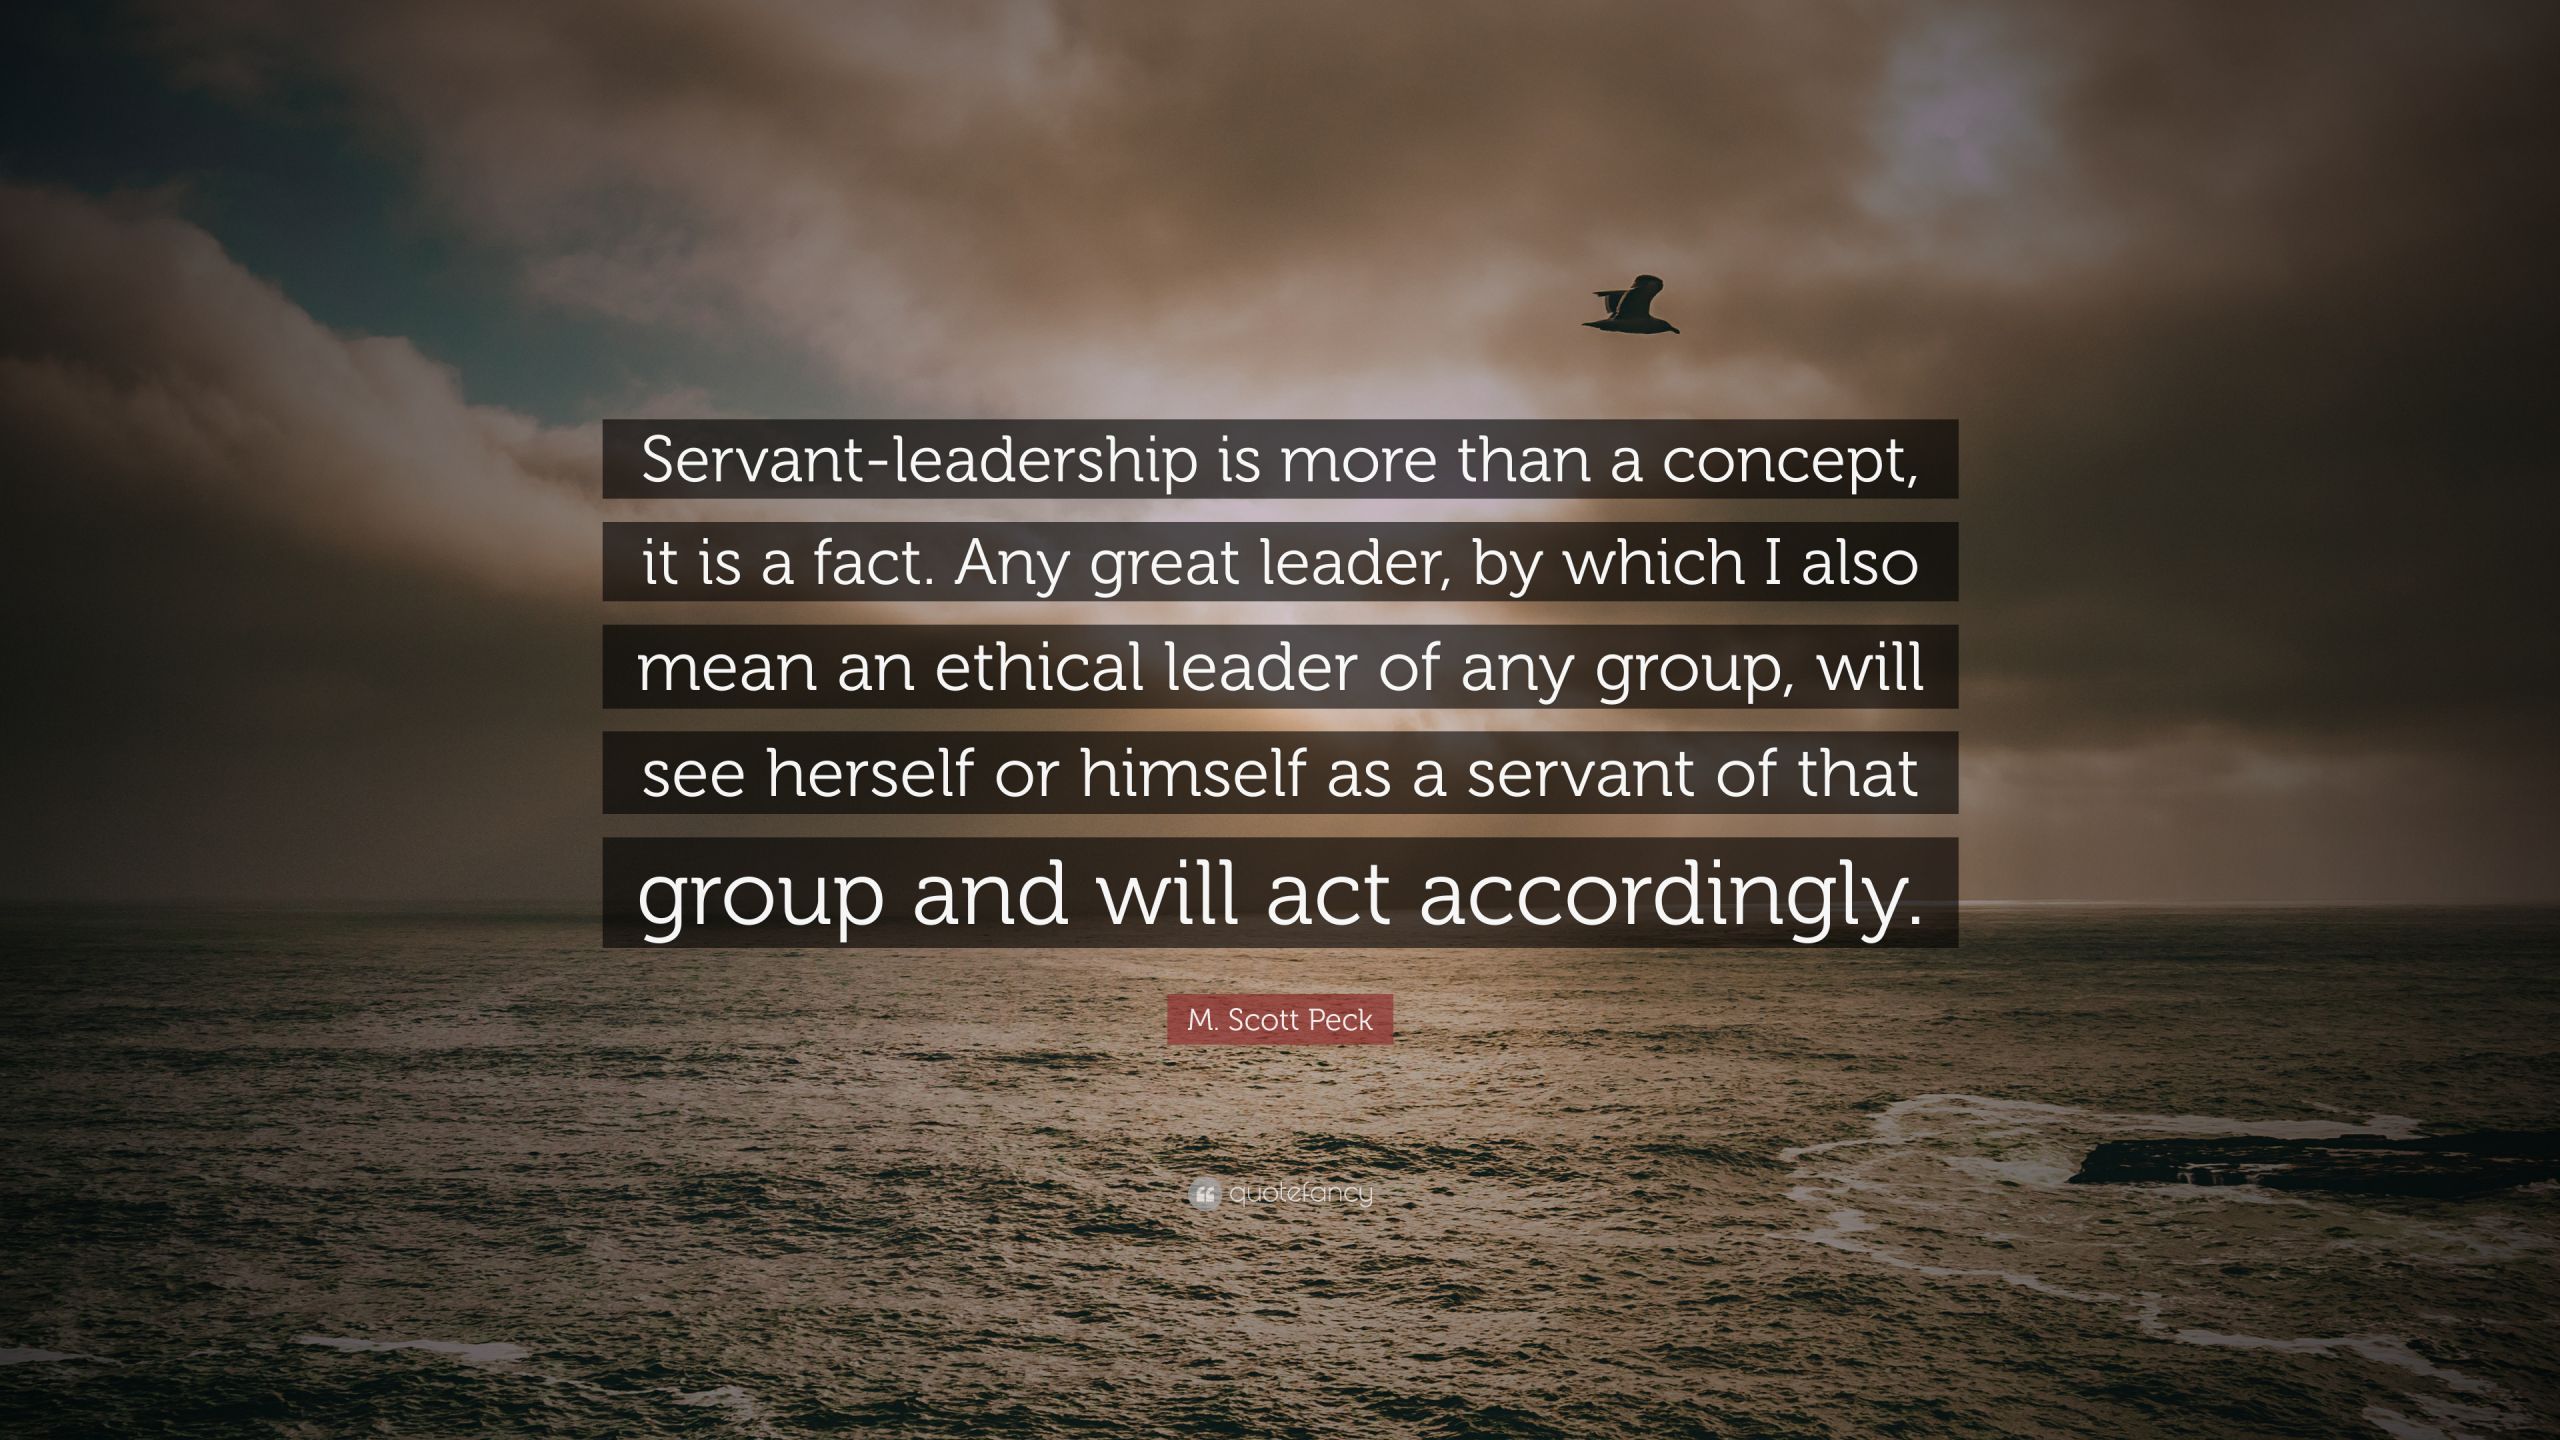 Quotes On Servant Leadership
 M Scott Peck Quote “Servant leadership is more than a